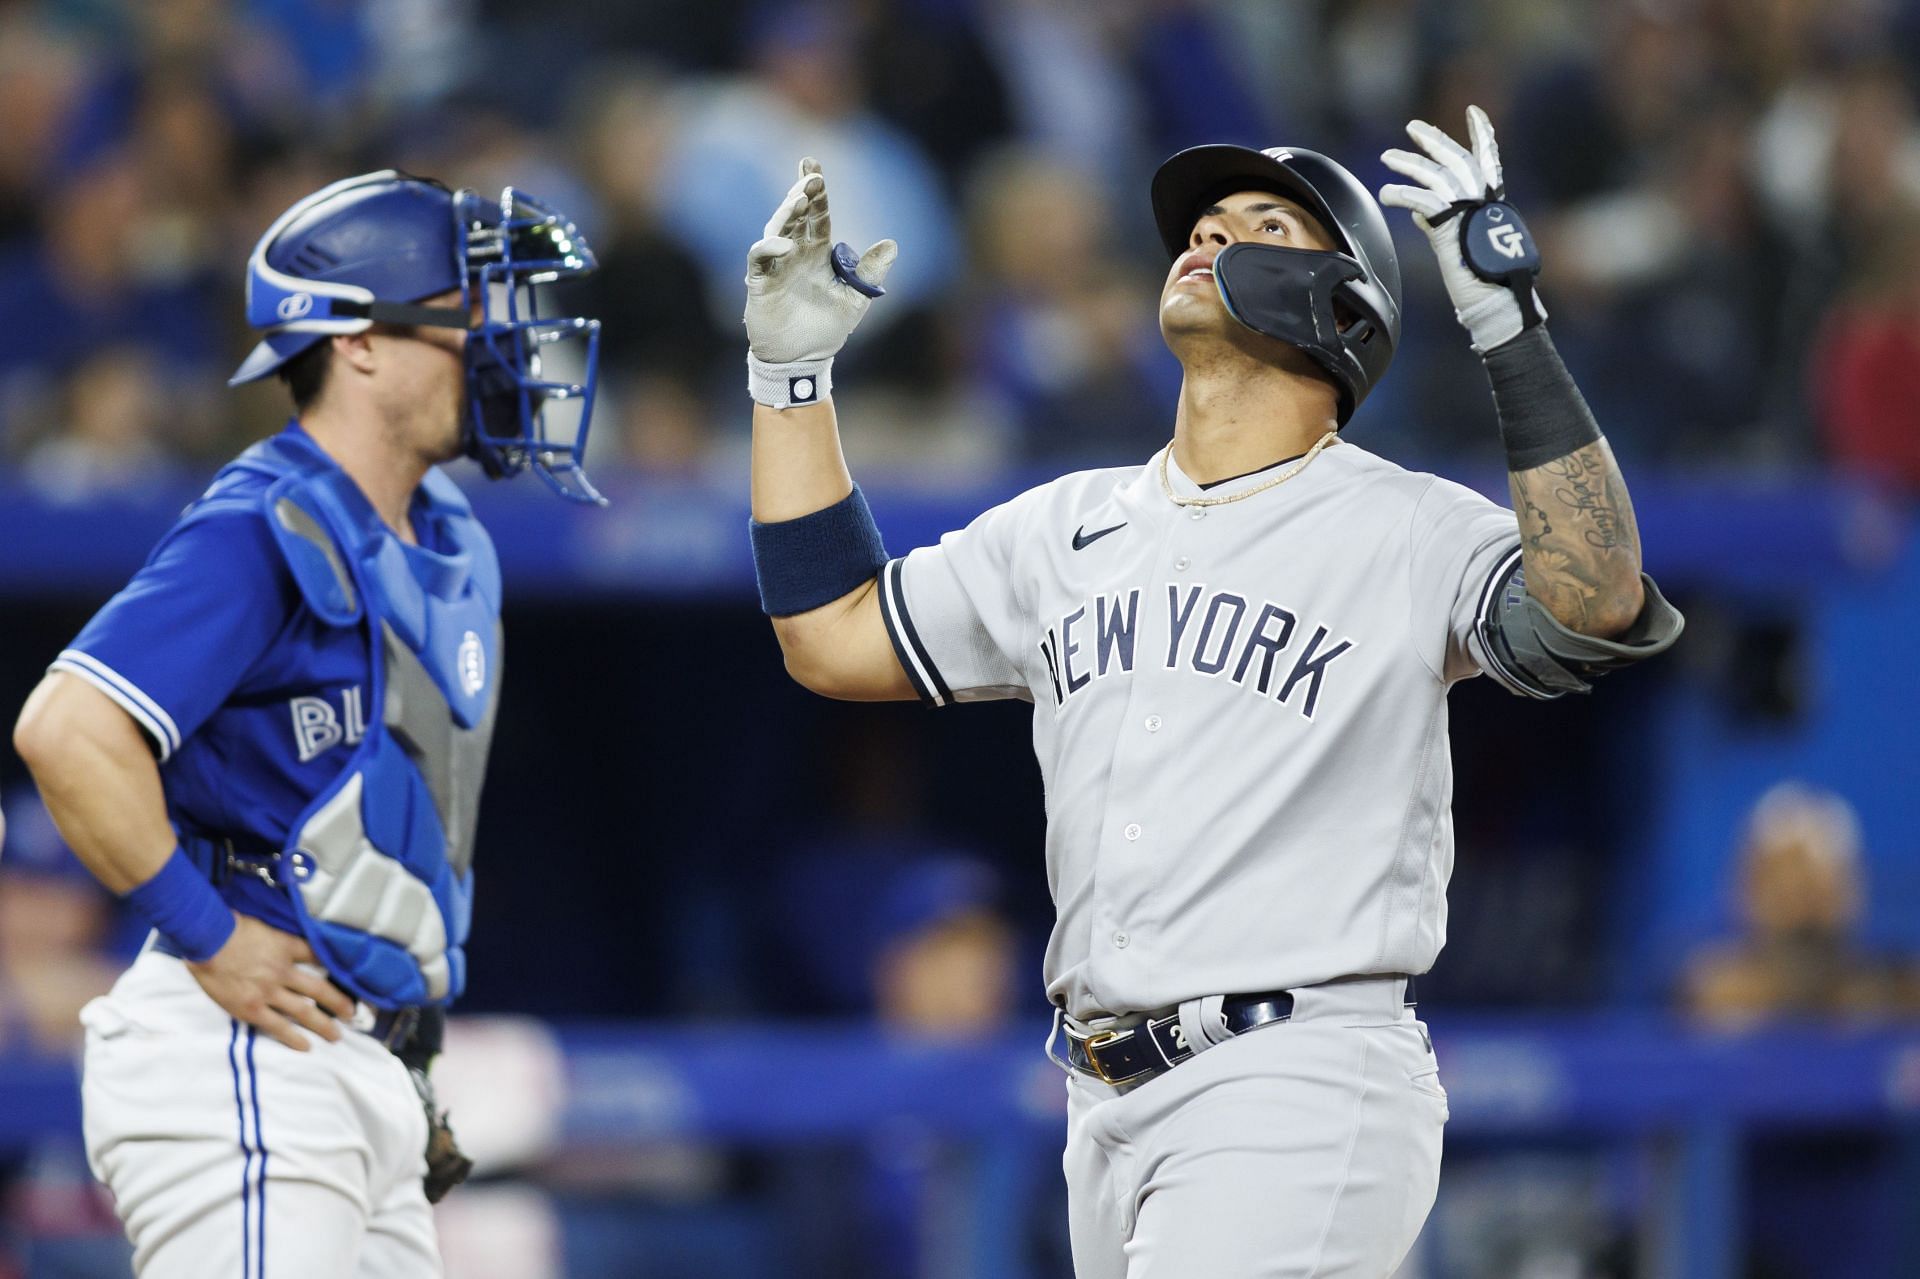 Gleyber Torres of the New York Yankees celebrates after a two-run home run against the Blue Jays on Monday night.